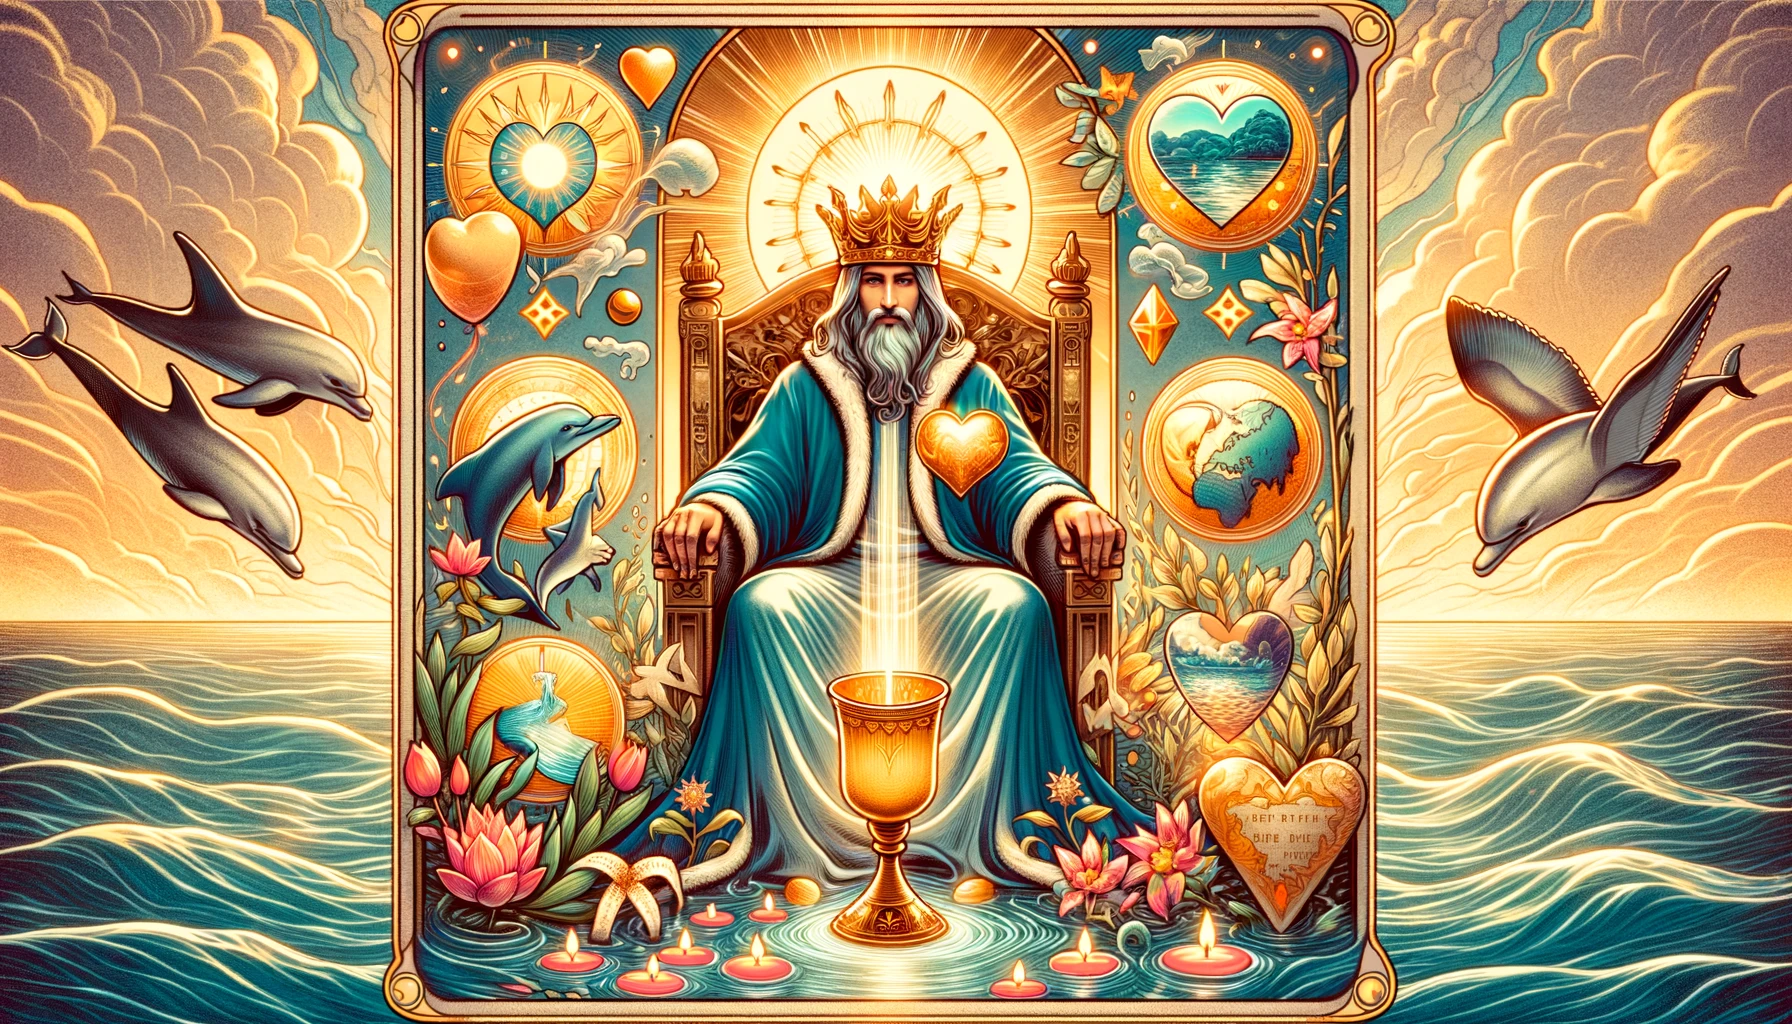 "Visual depiction of the King of Cups embodying emotional depth, understanding, and nurturing qualities, offering a compelling backdrop for exploring emotional desires and aspirations."